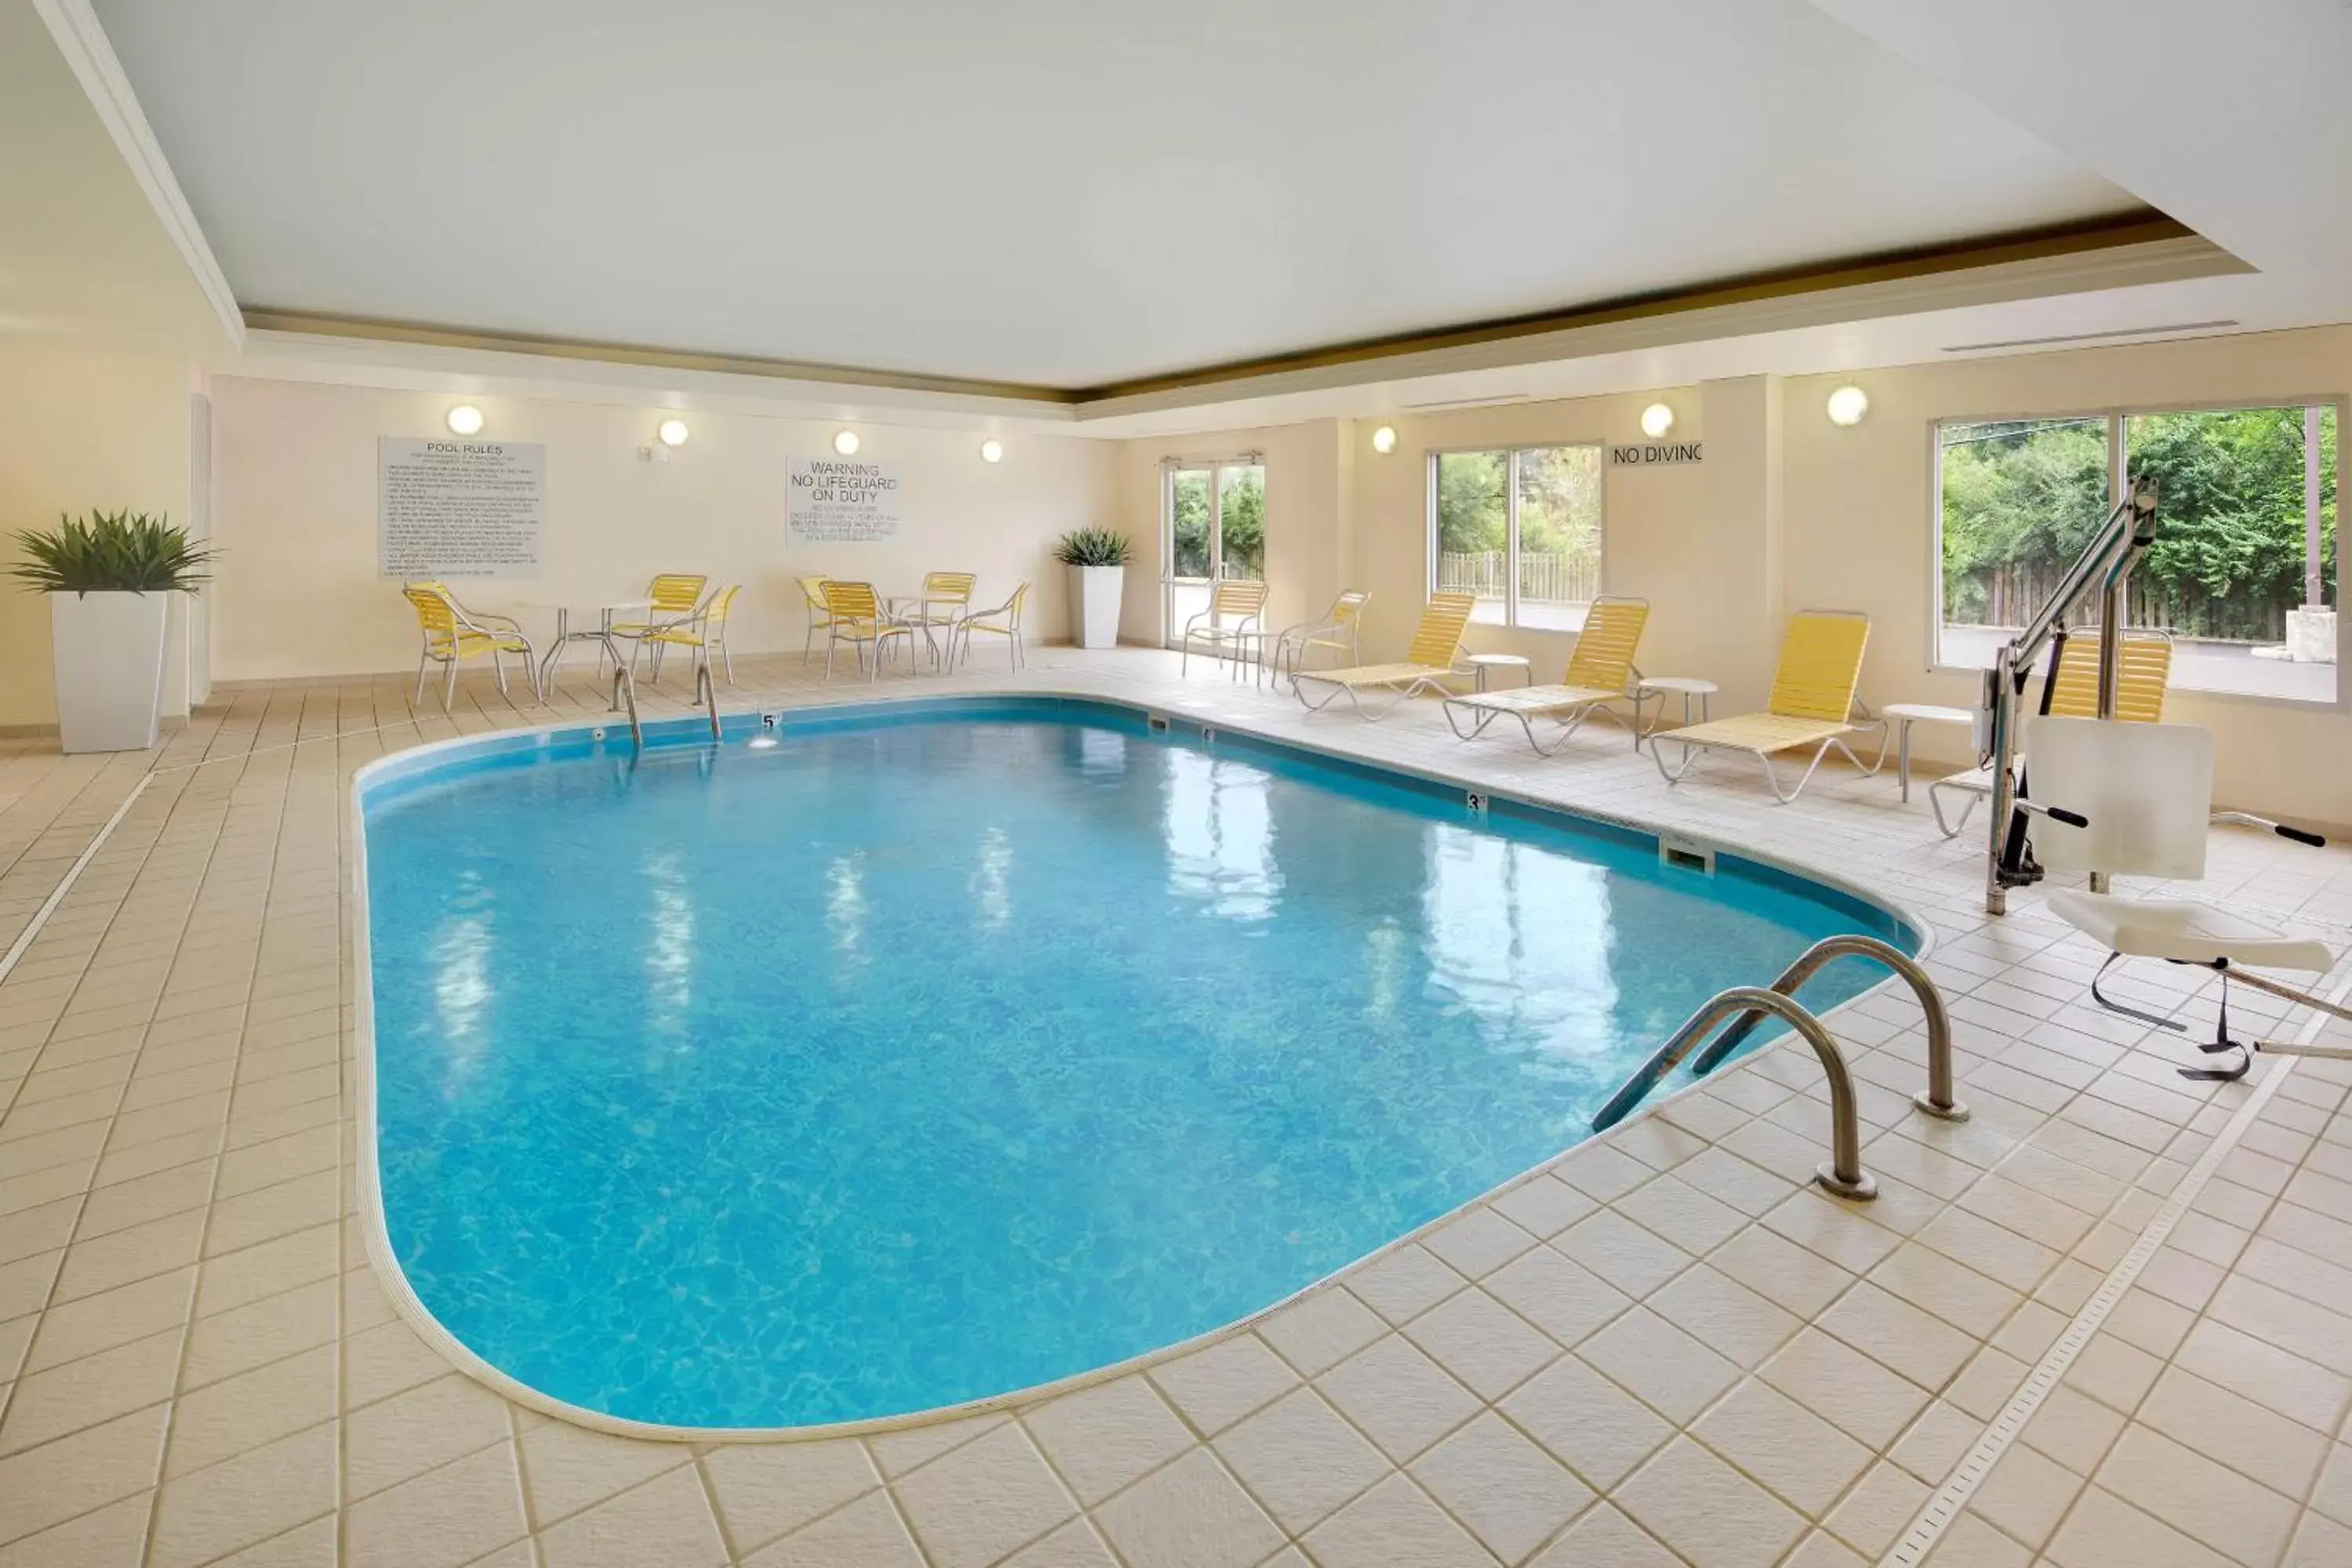 Swimming Pool in Fairfield Inn & Suites Indianapolis Airport